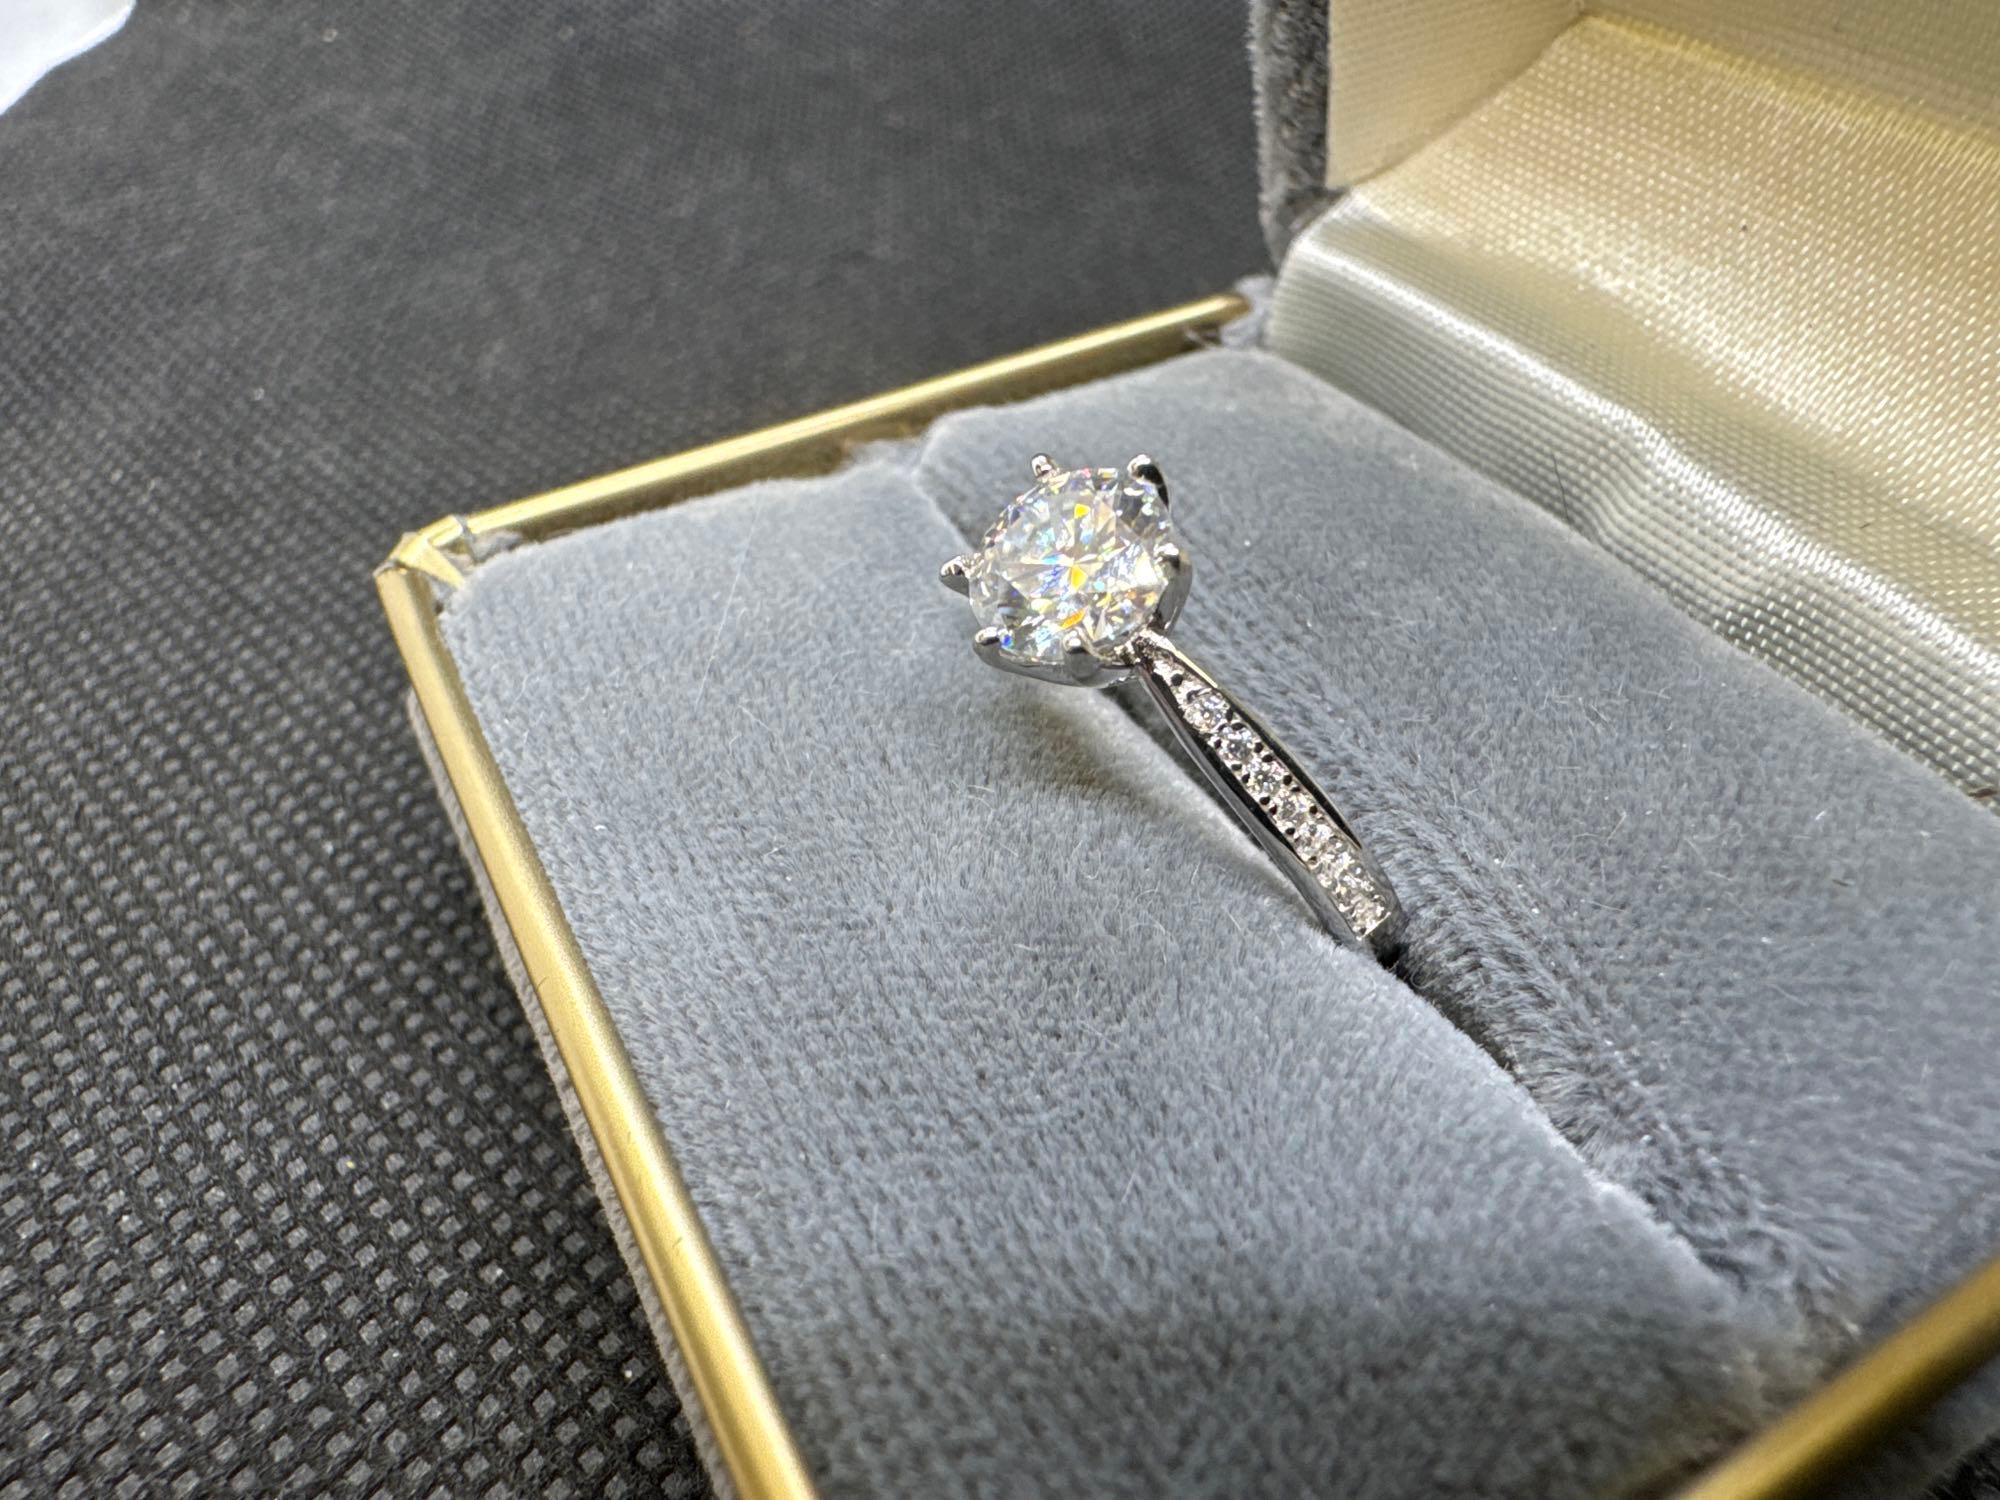 Silver 925 Moissanite Diamond Ring With GRA Certificate 2.35 Grams Size 7